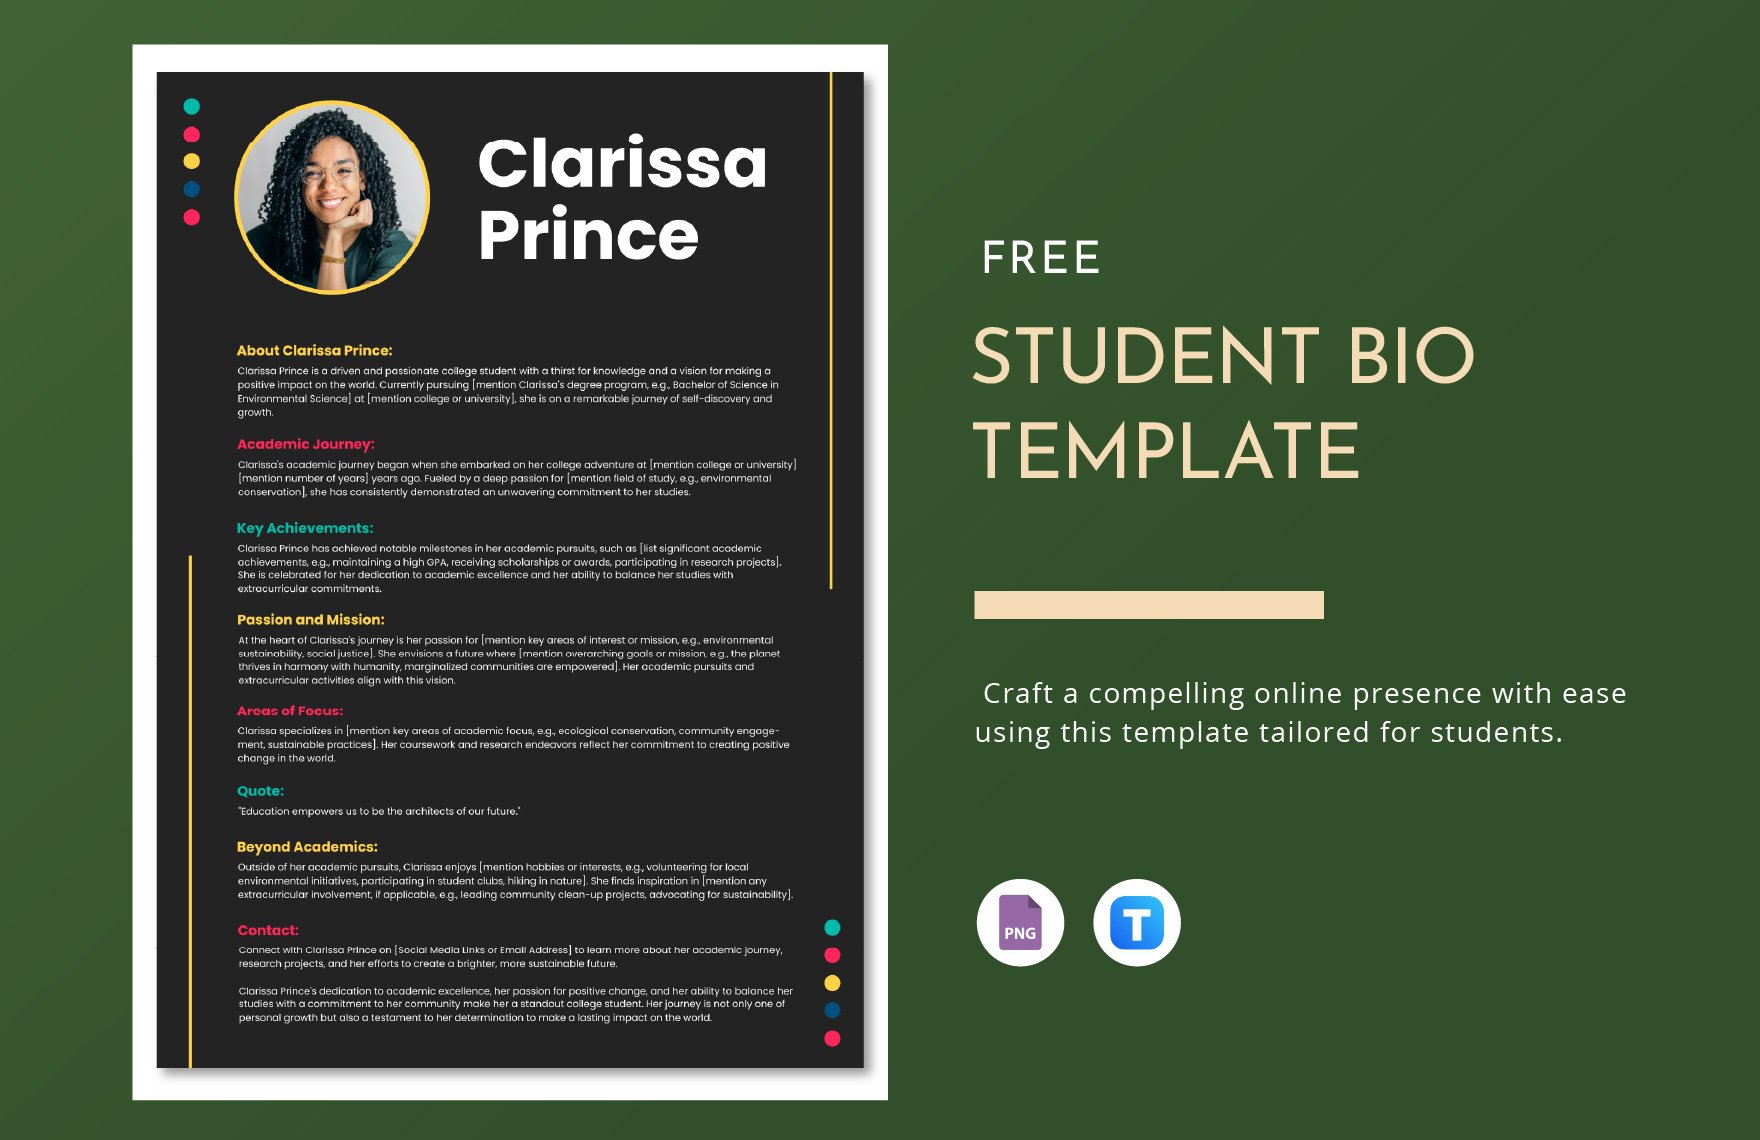 Free Student Bio Template in PNG